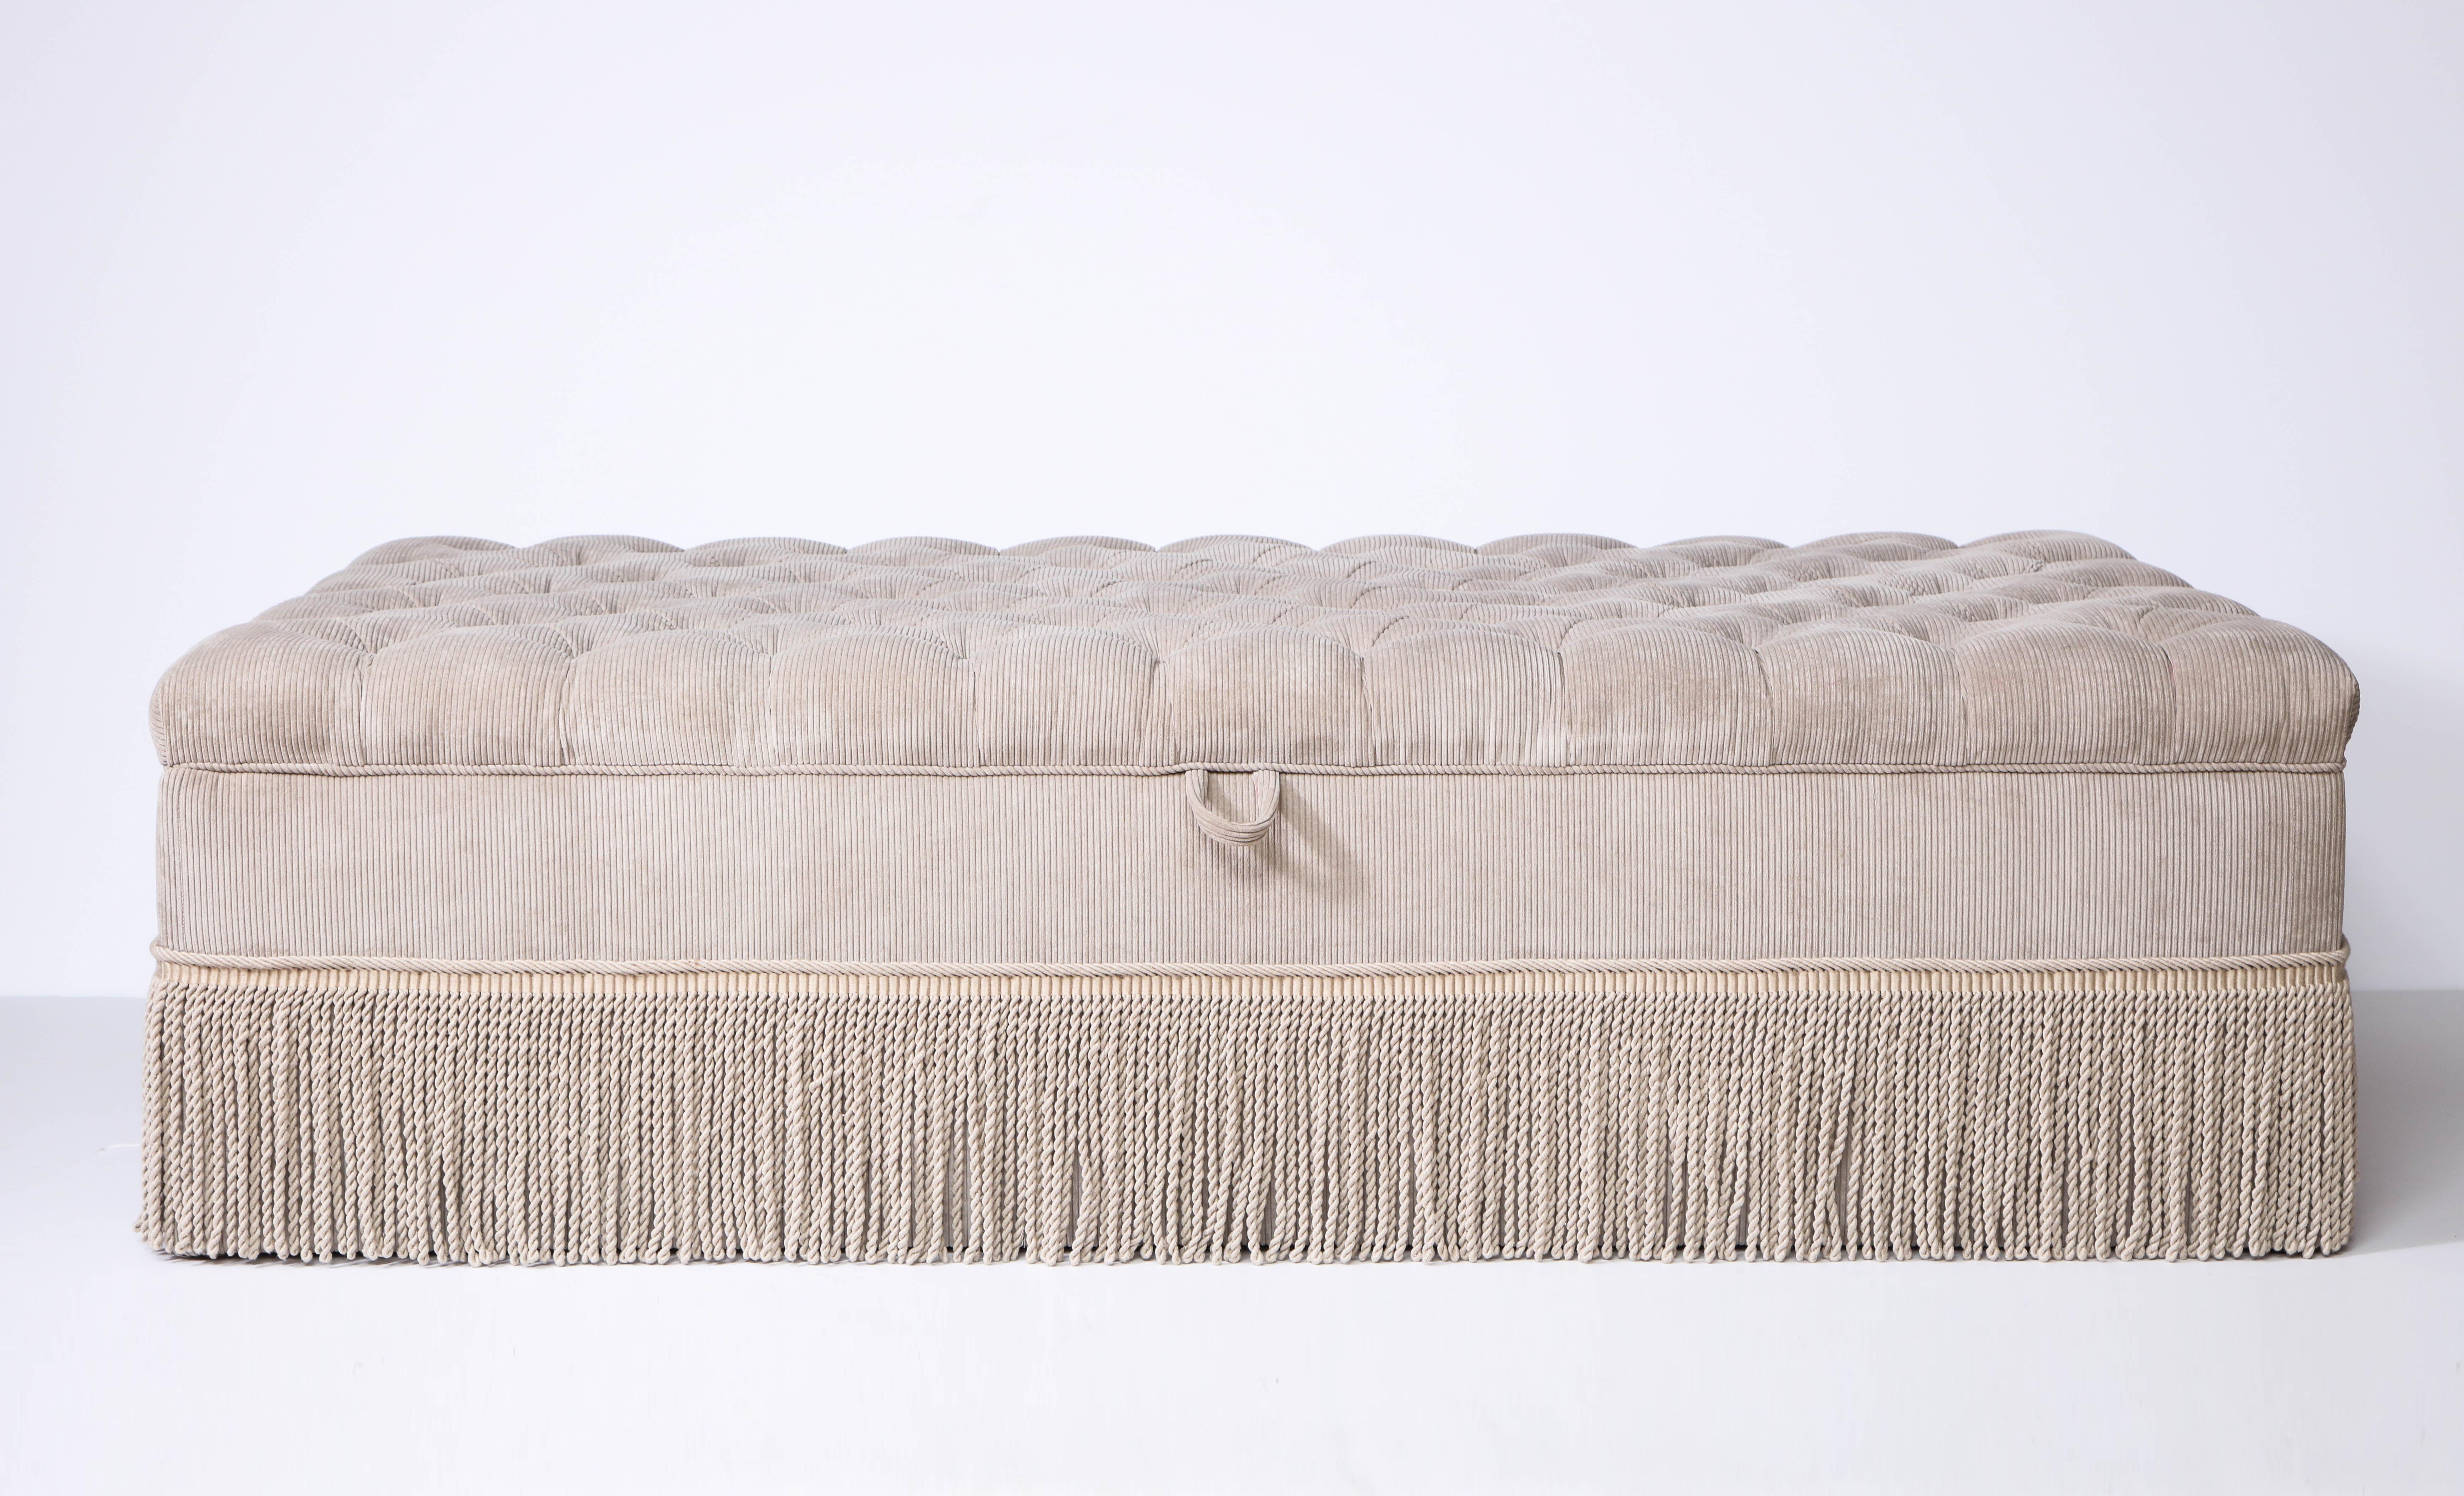 custom made corduroy tufted ottoman, upholstered in JAB Chivasso Pure Vision fabric with Samuel & Sons fringe. Hinged top opens for storage. Super soft and velvety to the touch, the piece has never been used.